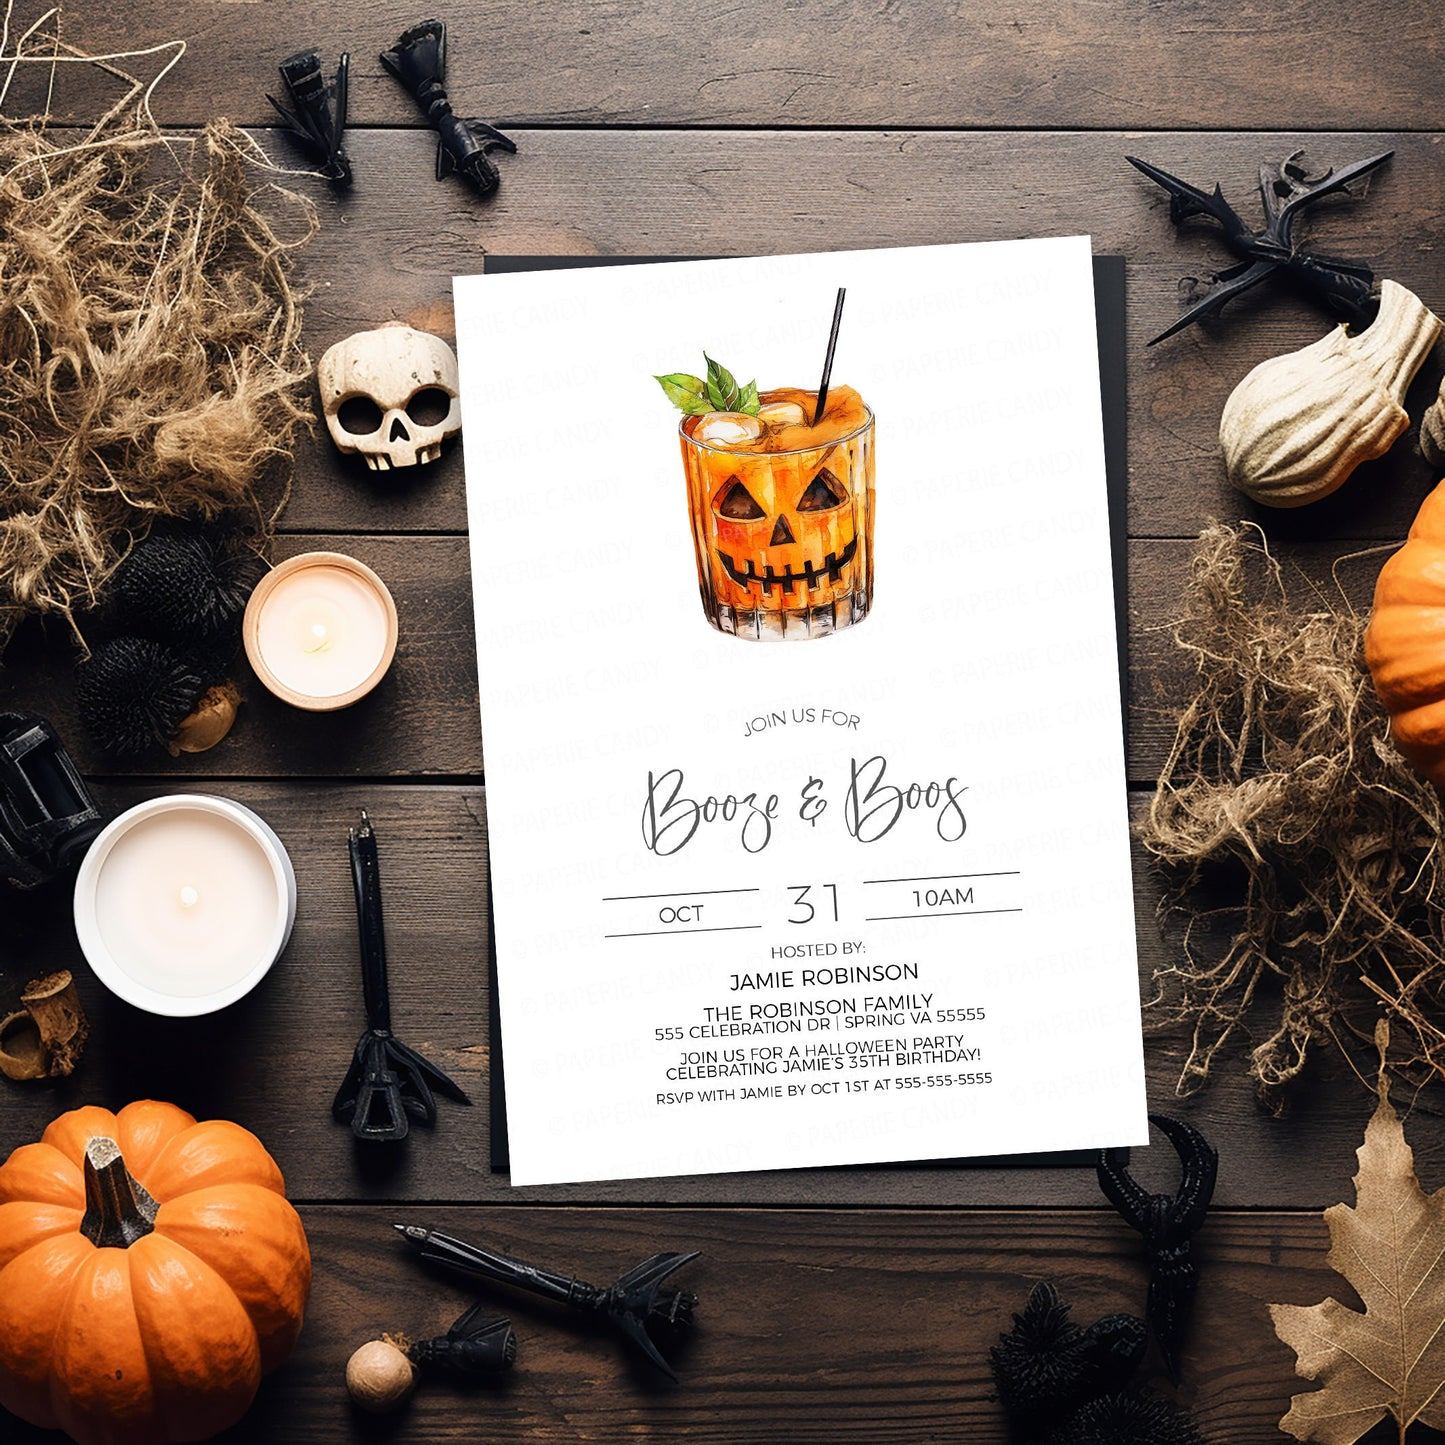 Halloween Booze And Boos Invitation, Cocktail Costume Party Invite, Costume Contest, Lunch Dinner, Happy Hour Adult Party, Digital Editable